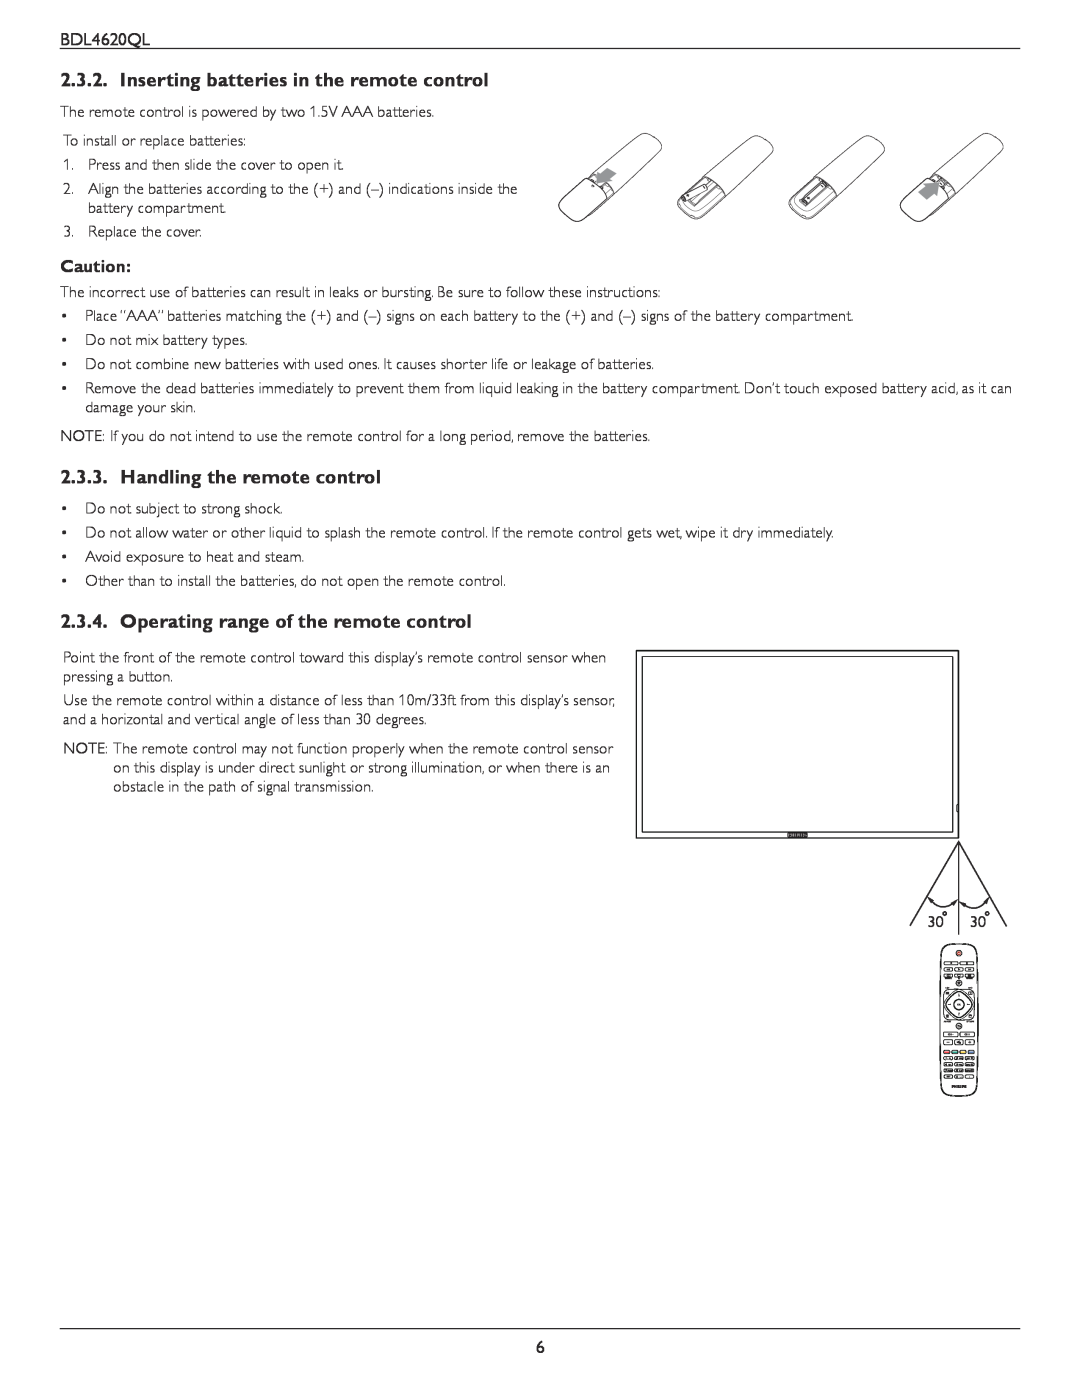 Philips BDL4620QL user manual Inserting batteries in the remote control, Handling the remote control 